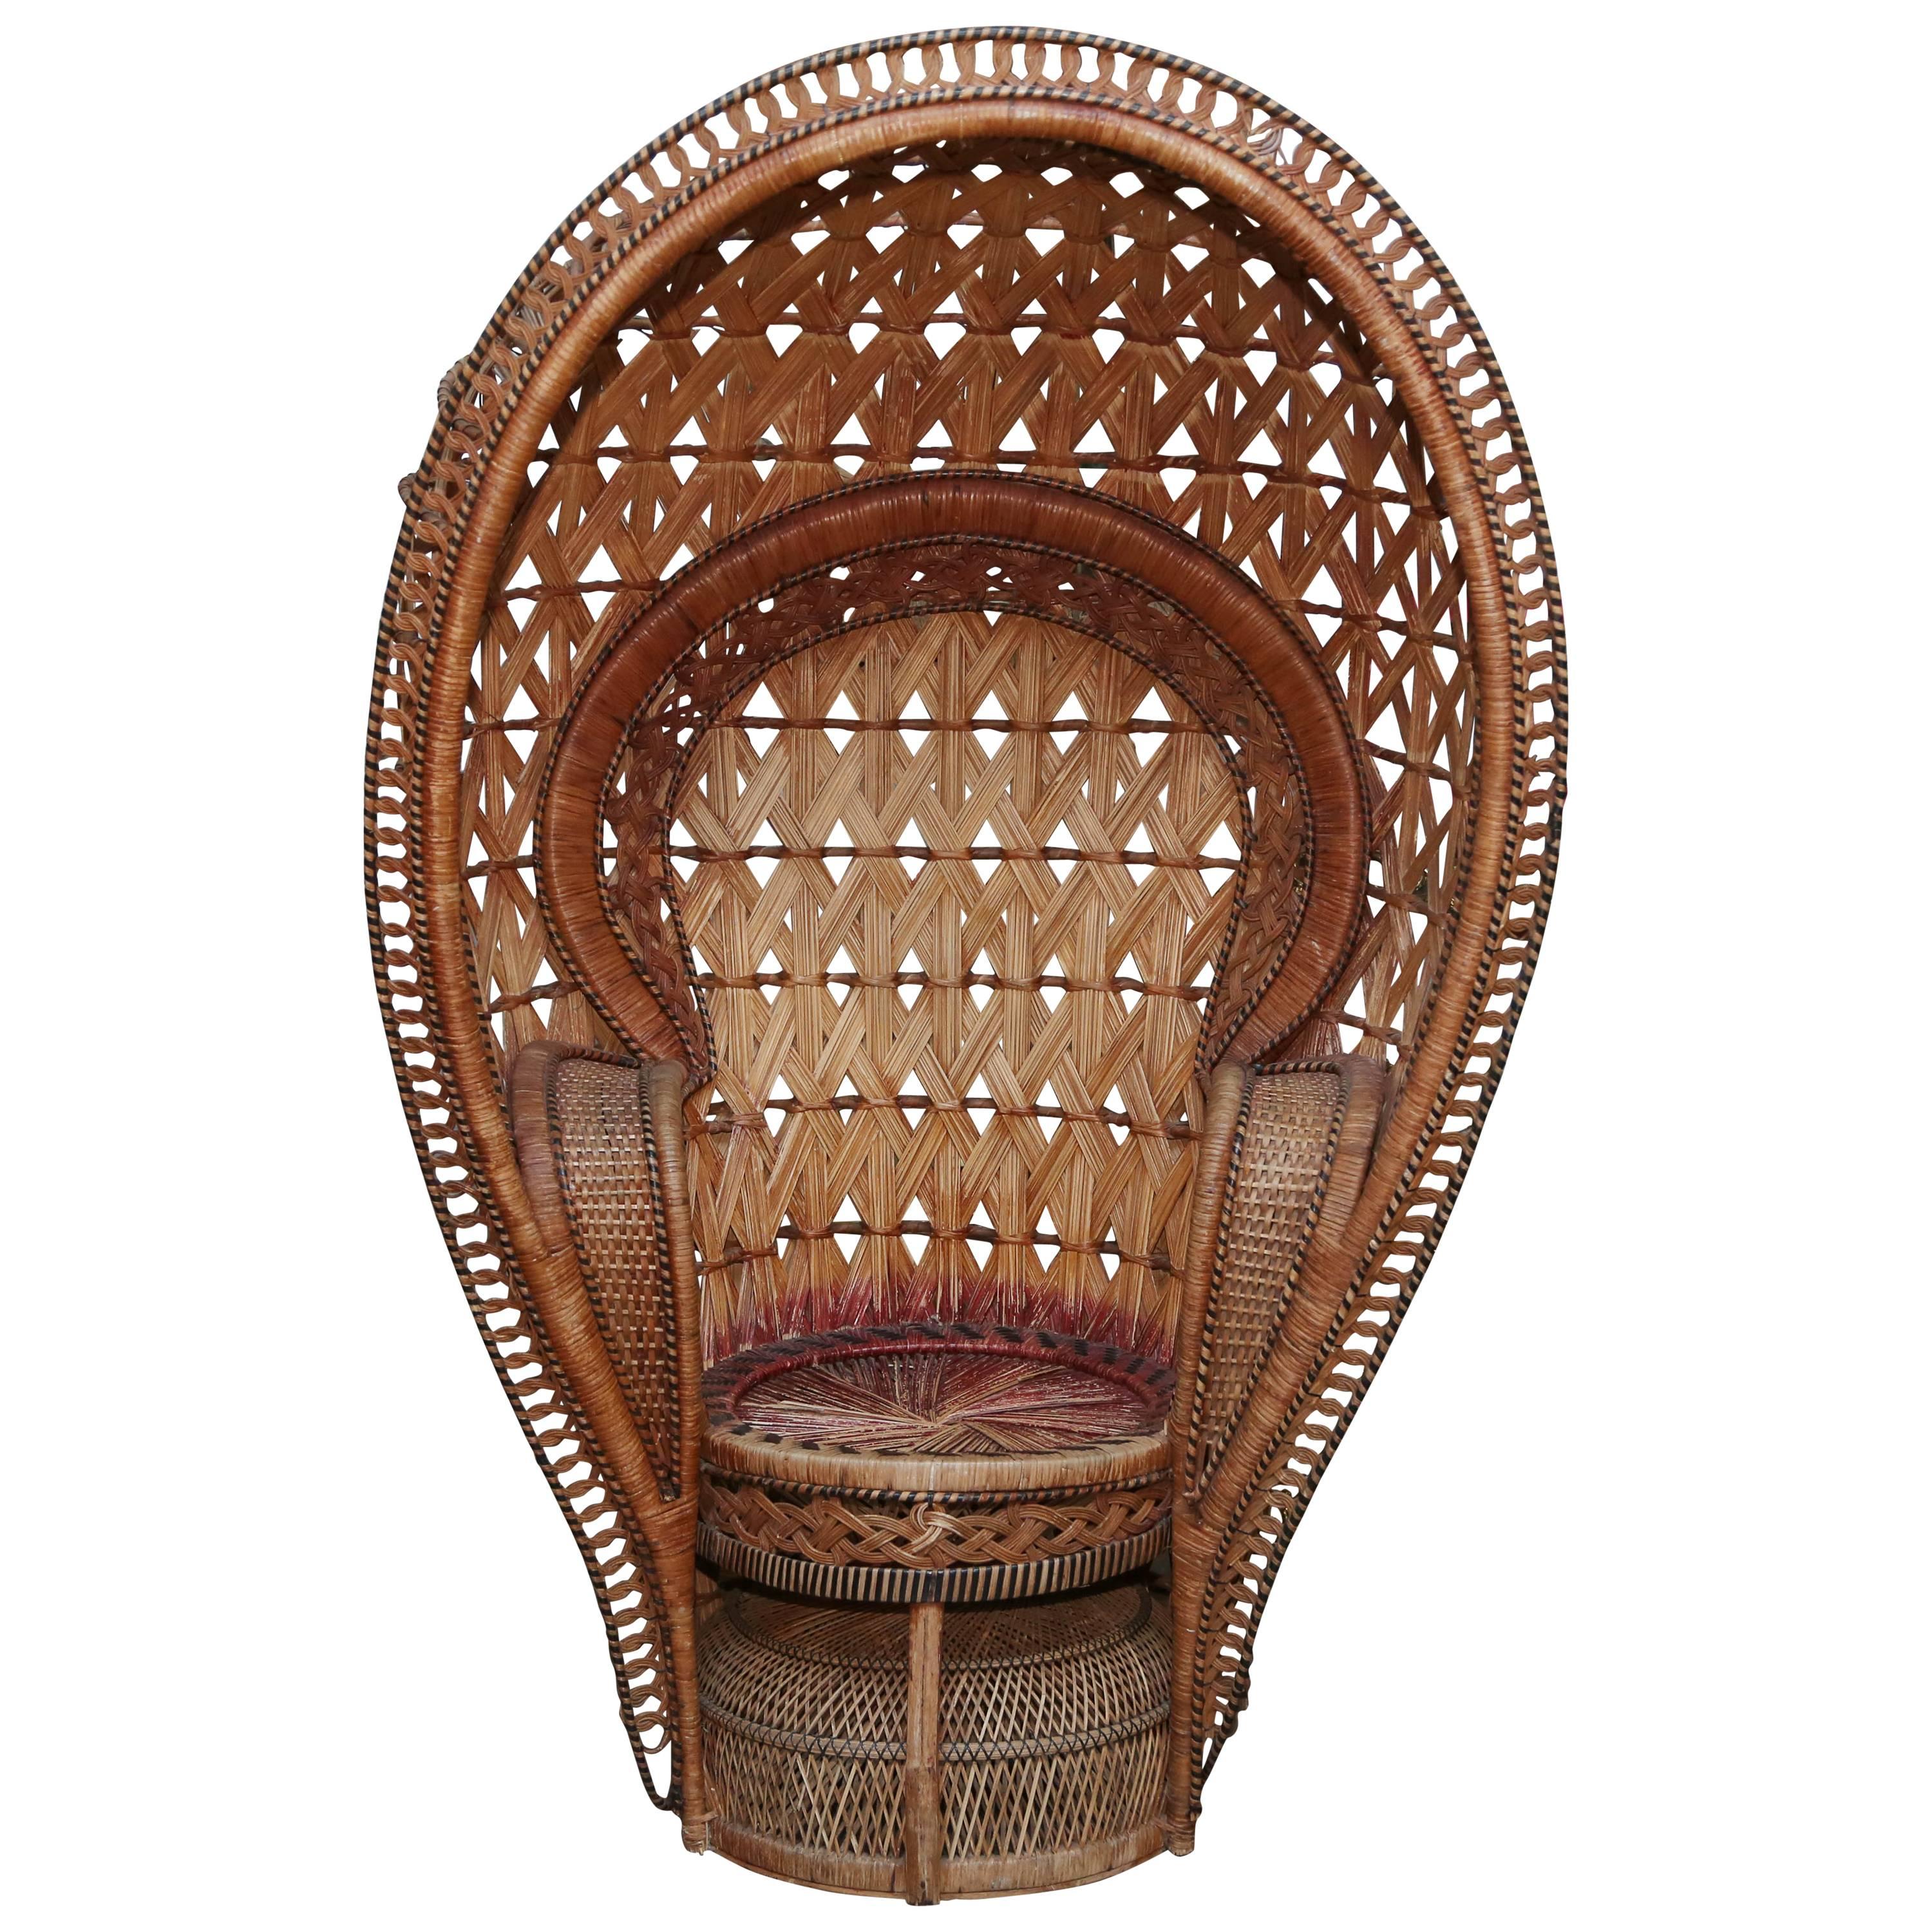 Quintessential Anglo-Indian "Peacock" Chair